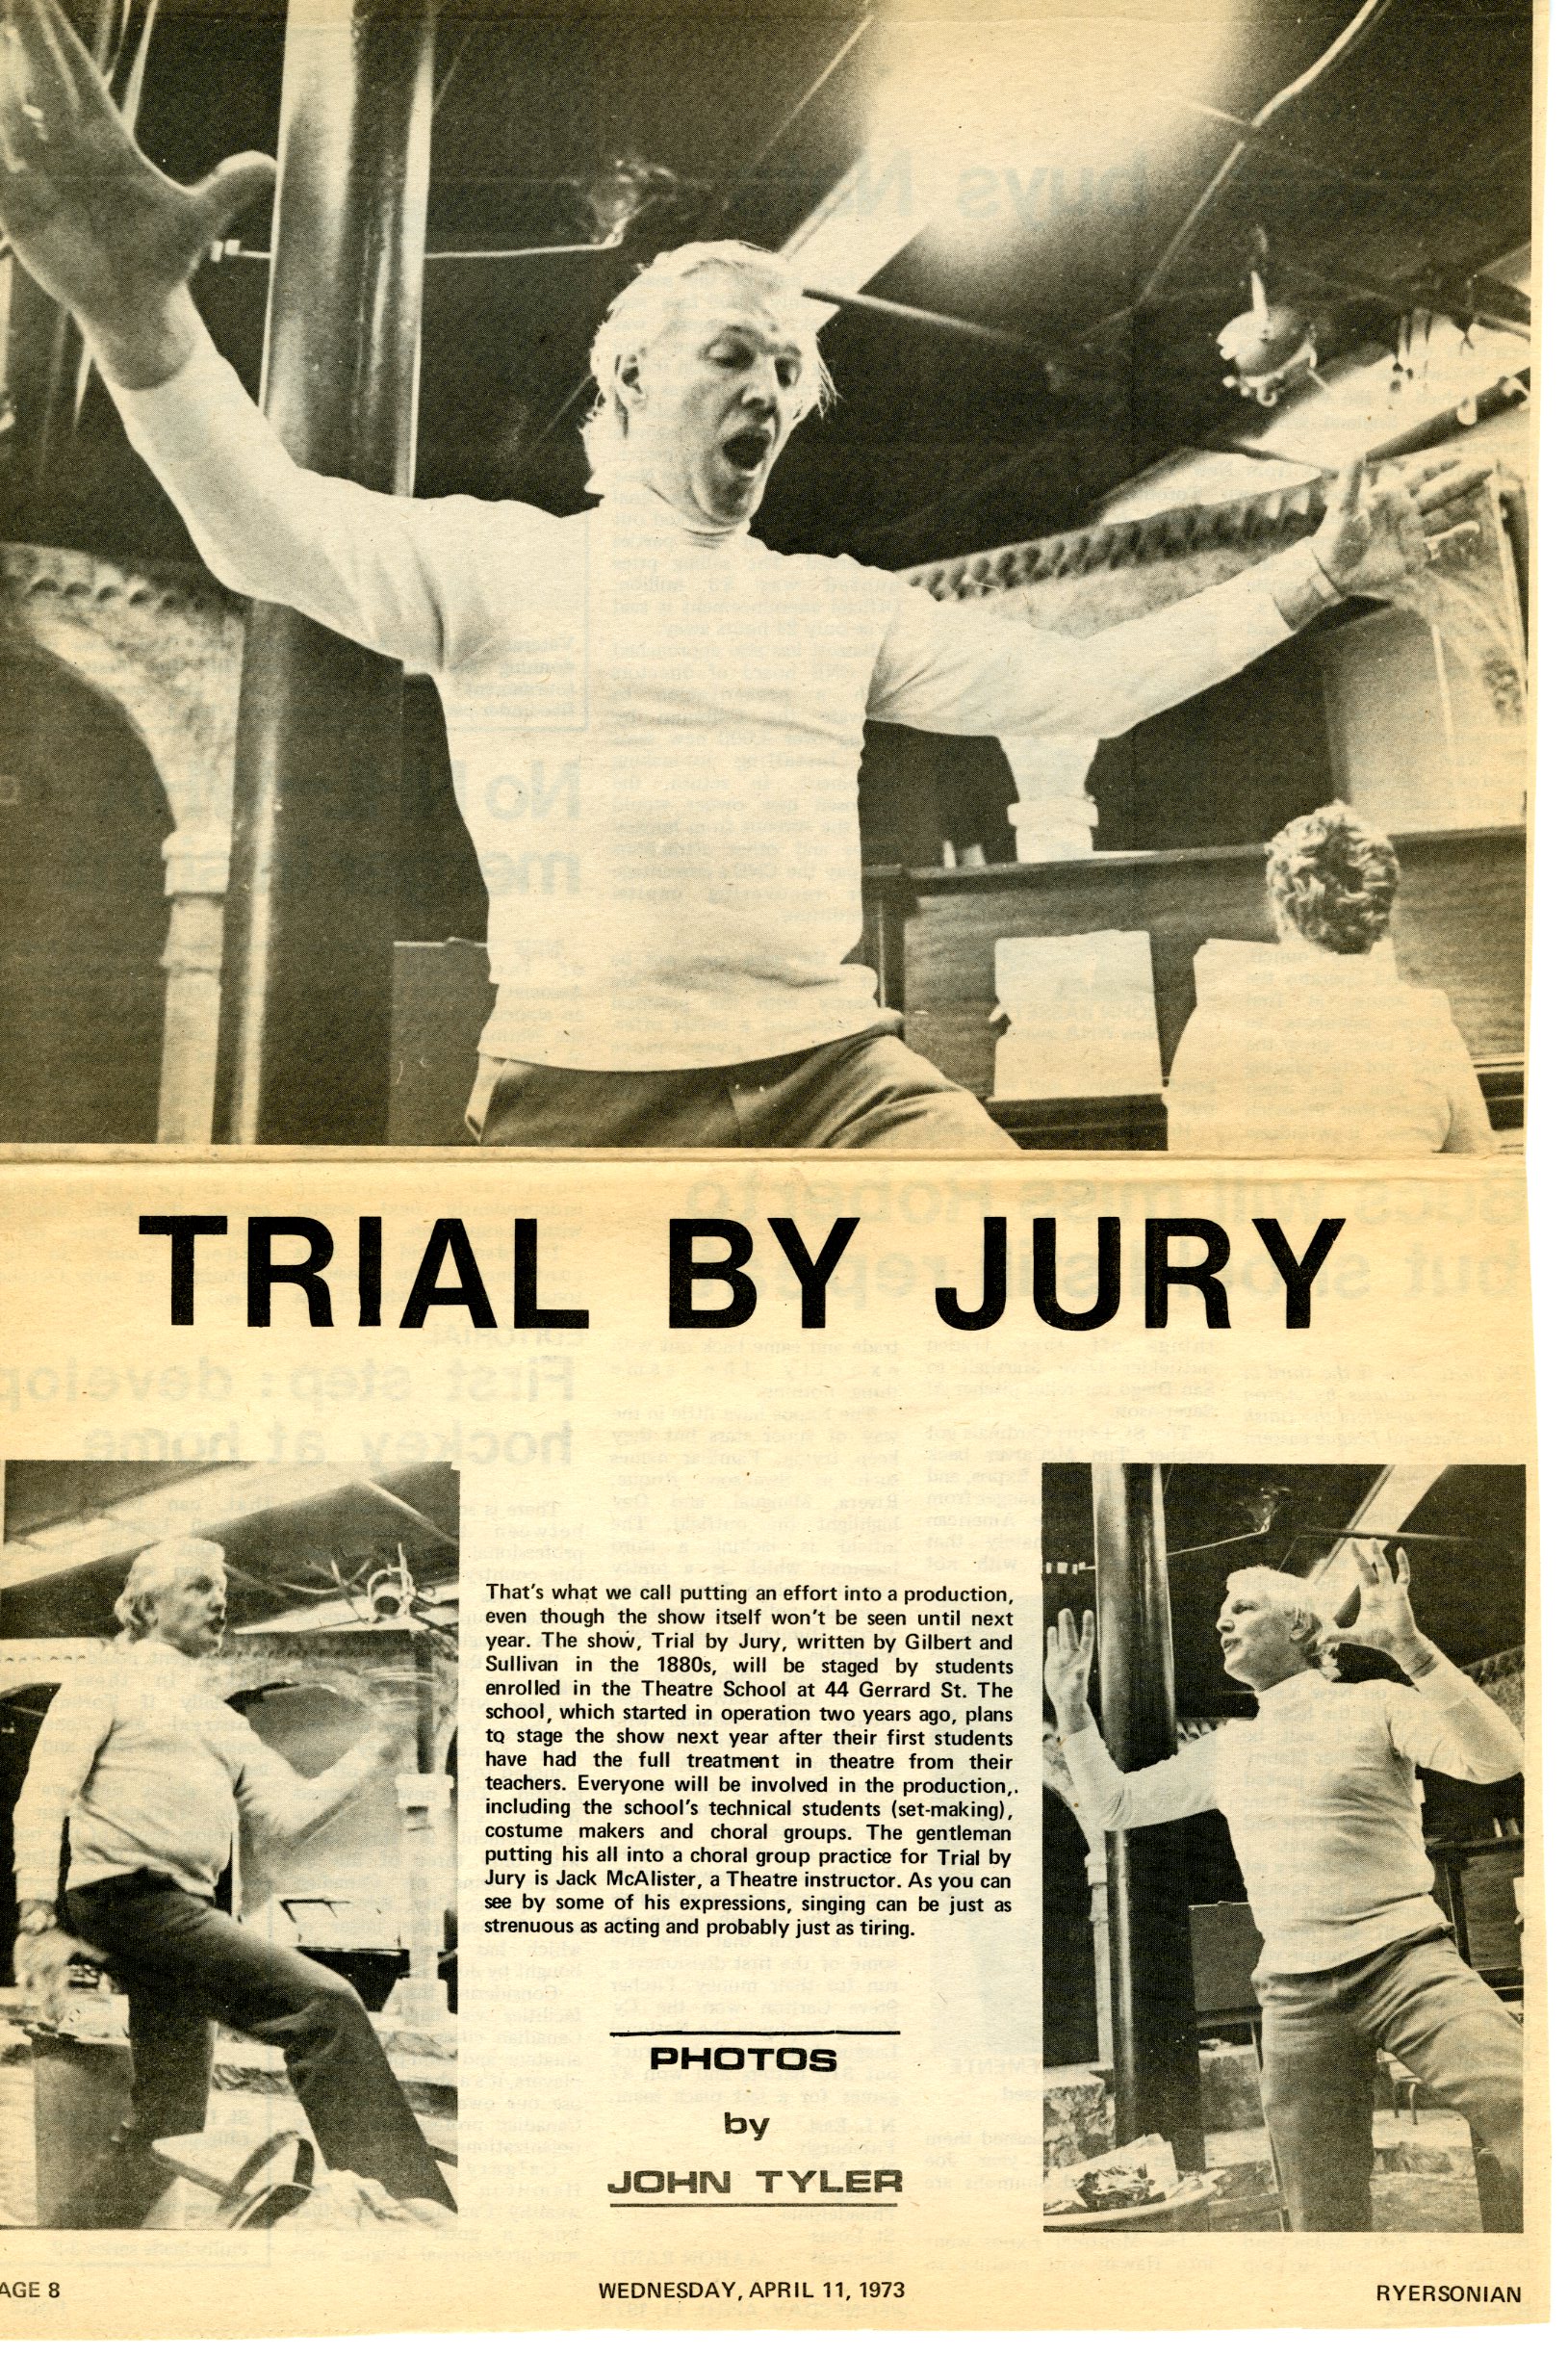 An old newspaper clipping with the title "Trial by Jury". Images show a man in a white turtle neck acting eccentrically 